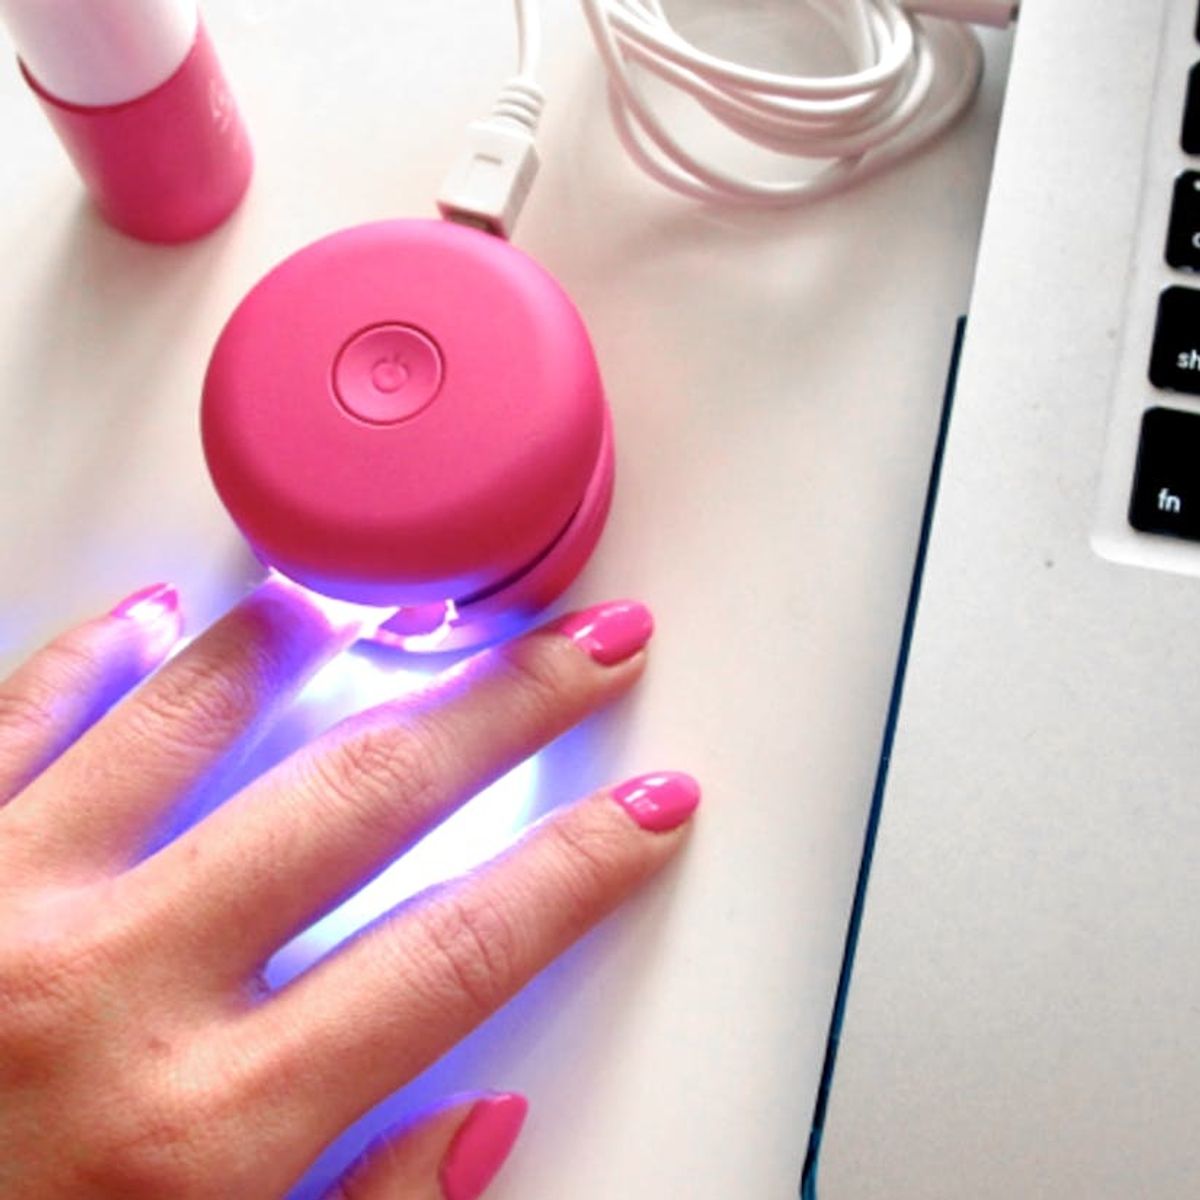 Does a DIY Gel Manicure Work as Well as the Real Thing? We Investigate.